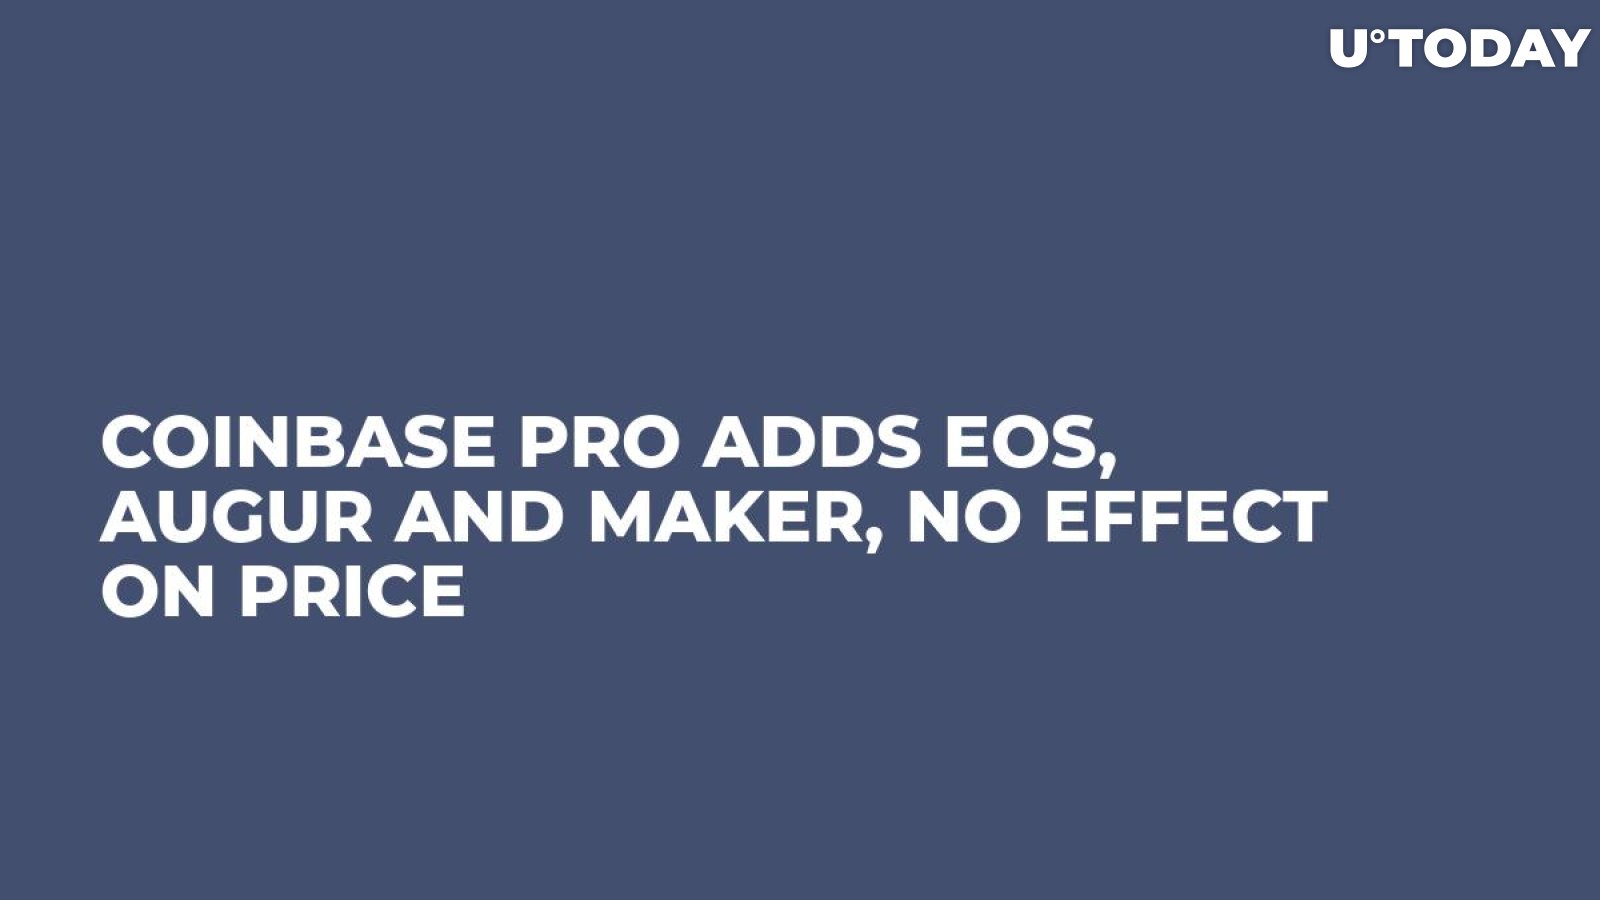 Coinbase Pro Adds EOS, Augur and Maker, No Effect on Price 